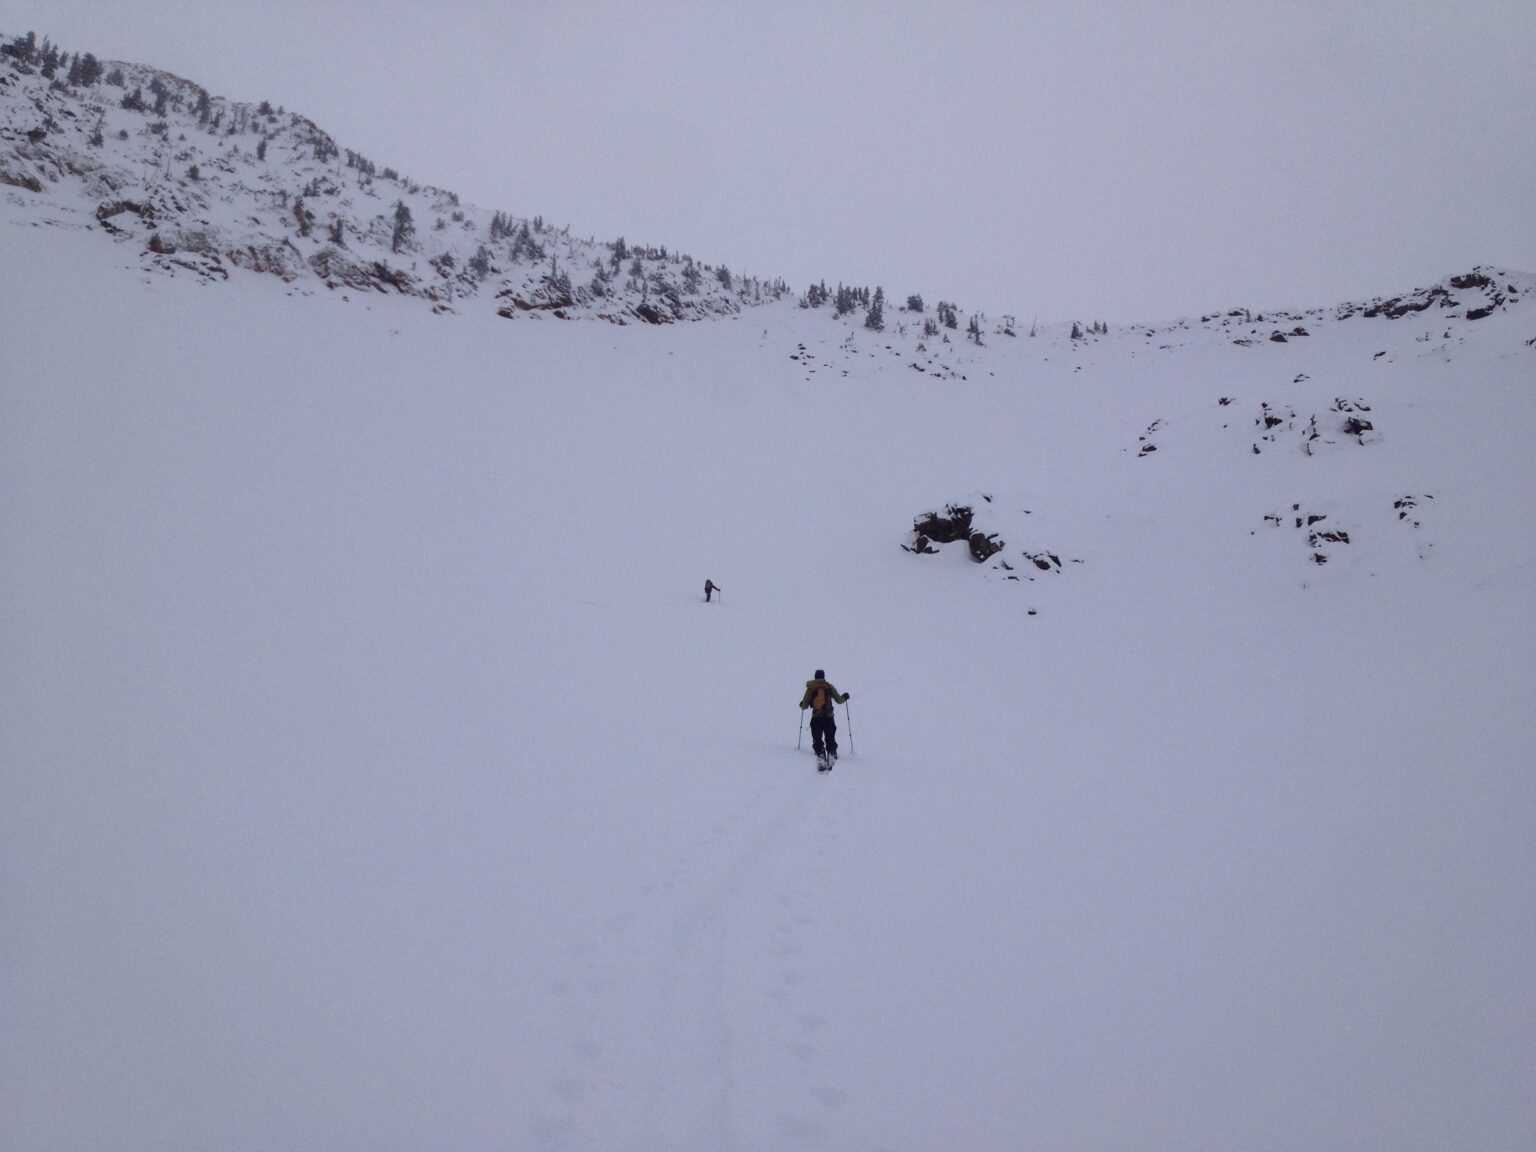 Ski touring up the upper basin in flat light conditions